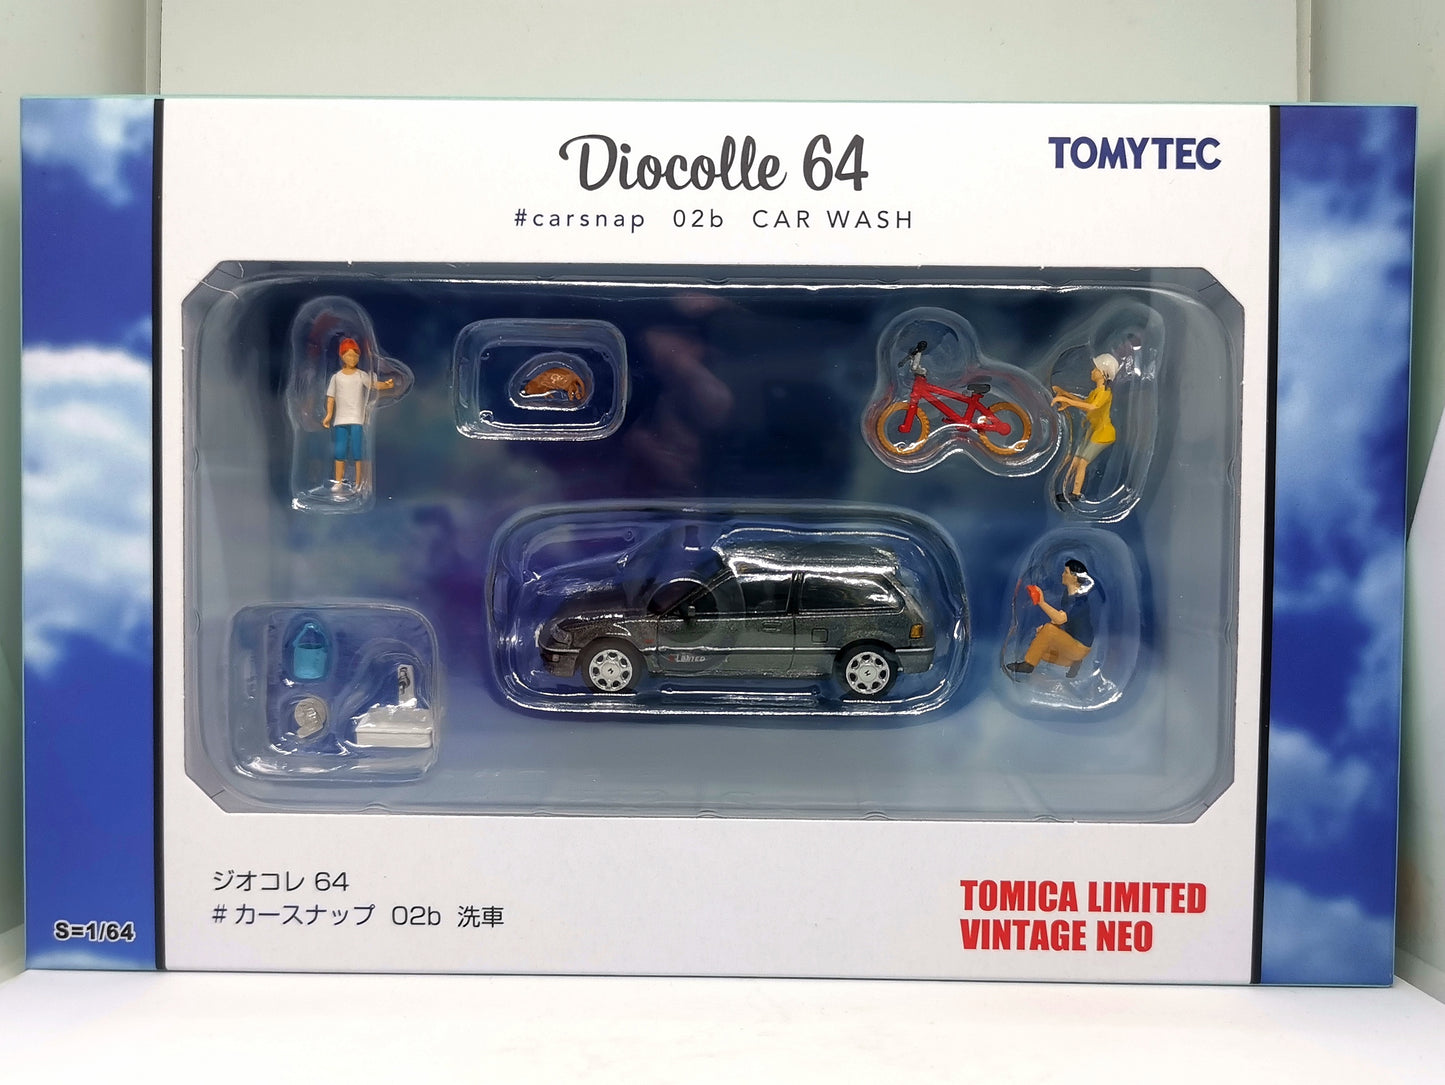 Tomytec Limited Vintage
Neo Diocolle64 Car Snap
02b Car Wash Diorama
With Honda Civic 25X S Limited Takara Tomy